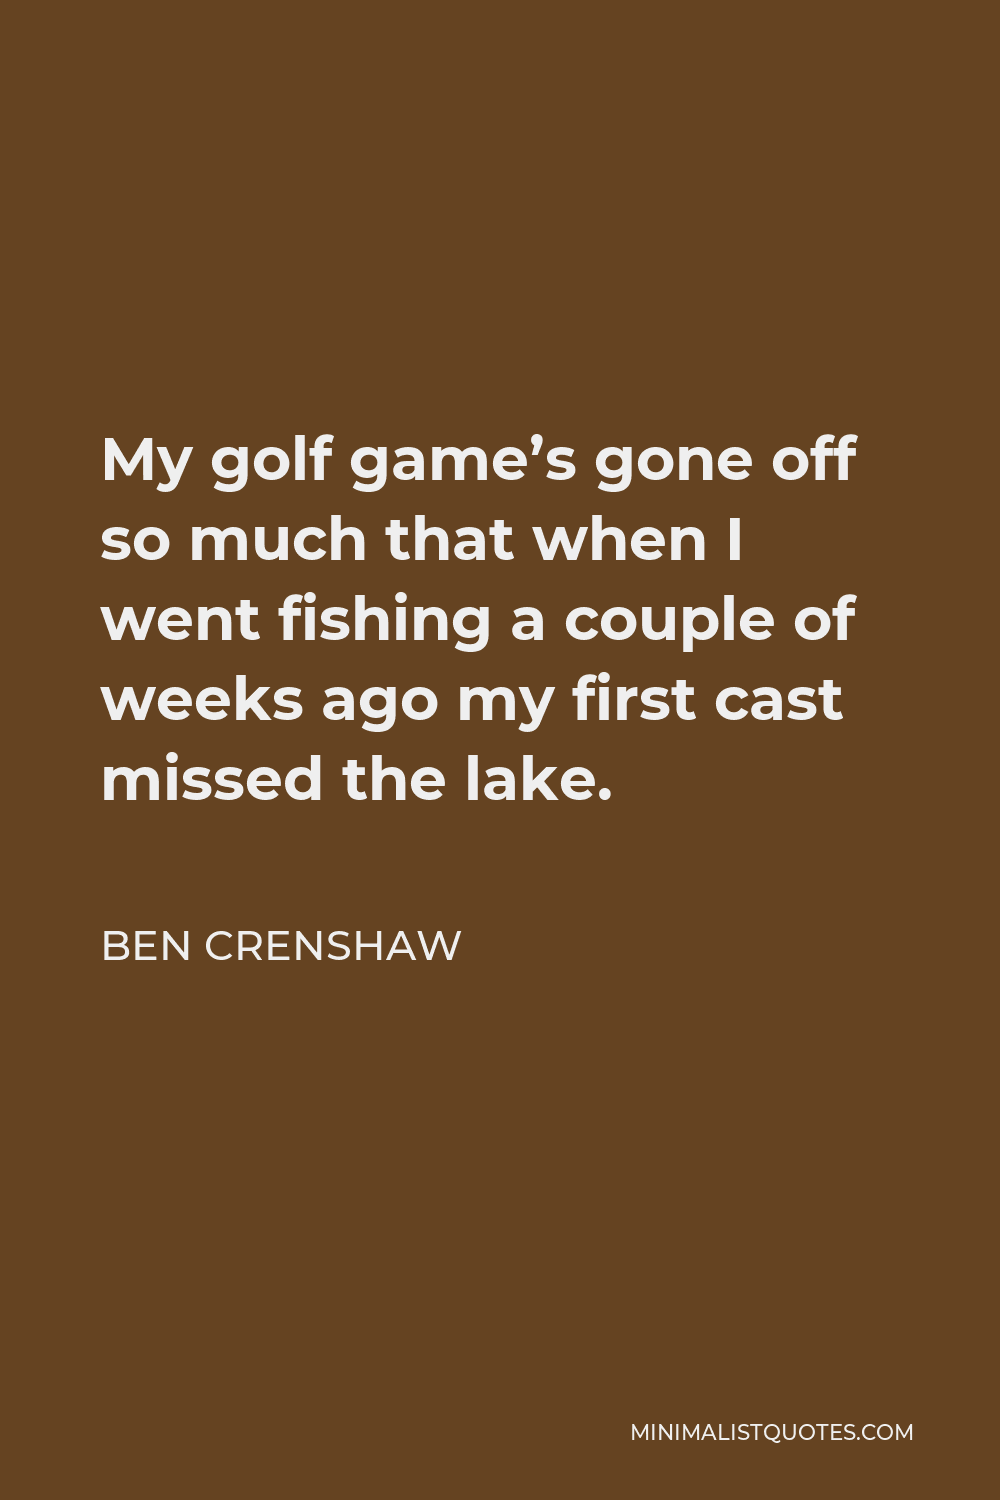 Ben Crenshaw Quote - My golf game’s gone off so much that when I went fishing a couple of weeks ago my first cast missed the lake.